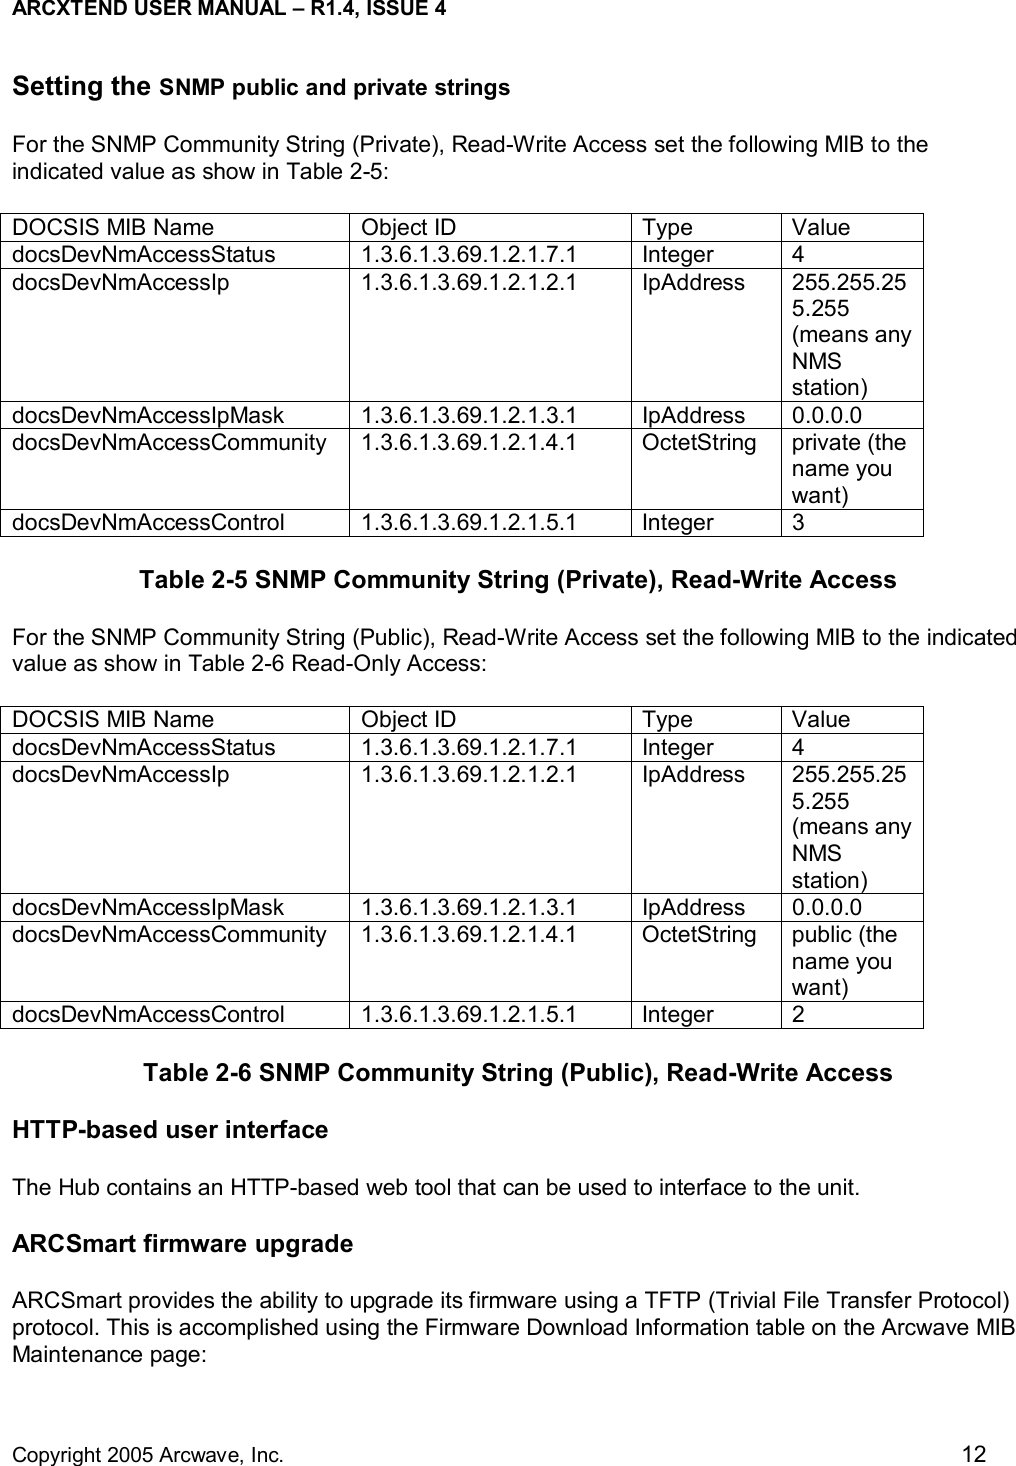 ARCXTEND USER MANUAL – R1.4, ISSUE 4  Copyright 2005 Arcwave, Inc.    12 Setting the SNMP public and private strings For the SNMP Community String (Private), Read-Write Access set the following MIB to the indicated value as show in Table 2-5: DOCSIS MIB Name  Object ID  Type  Value docsDevNmAccessStatus 1.3.6.1.3.69.1.2.1.7.1 Integer 4 docsDevNmAccessIp 1.3.6.1.3.69.1.2.1.2.1 IpAddress 255.255.255.255 (means any NMS station) docsDevNmAccessIpMask 1.3.6.1.3.69.1.2.1.3.1 IpAddress 0.0.0.0 docsDevNmAccessCommunity 1.3.6.1.3.69.1.2.1.4.1  OctetString private (the name you want) docsDevNmAccessControl 1.3.6.1.3.69.1.2.1.5.1 Integer 3 Table 2-5 SNMP Community String (Private), Read-Write Access For the SNMP Community String (Public), Read-Write Access set the following MIB to the indicated value as show in Table 2-6 Read-Only Access: DOCSIS MIB Name  Object ID  Type  Value docsDevNmAccessStatus 1.3.6.1.3.69.1.2.1.7.1 Integer 4 docsDevNmAccessIp 1.3.6.1.3.69.1.2.1.2.1 IpAddress 255.255.255.255 (means any NMS station) docsDevNmAccessIpMask 1.3.6.1.3.69.1.2.1.3.1 IpAddress 0.0.0.0 docsDevNmAccessCommunity 1.3.6.1.3.69.1.2.1.4.1  OctetString public (the name you want) docsDevNmAccessControl 1.3.6.1.3.69.1.2.1.5.1 Integer 2 Table 2-6 SNMP Community String (Public), Read-Write Access HTTP-based user interface  The Hub contains an HTTP-based web tool that can be used to interface to the unit.  ARCSmart firmware upgrade ARCSmart provides the ability to upgrade its firmware using a TFTP (Trivial File Transfer Protocol) protocol. This is accomplished using the Firmware Download Information table on the Arcwave MIB Maintenance page: 